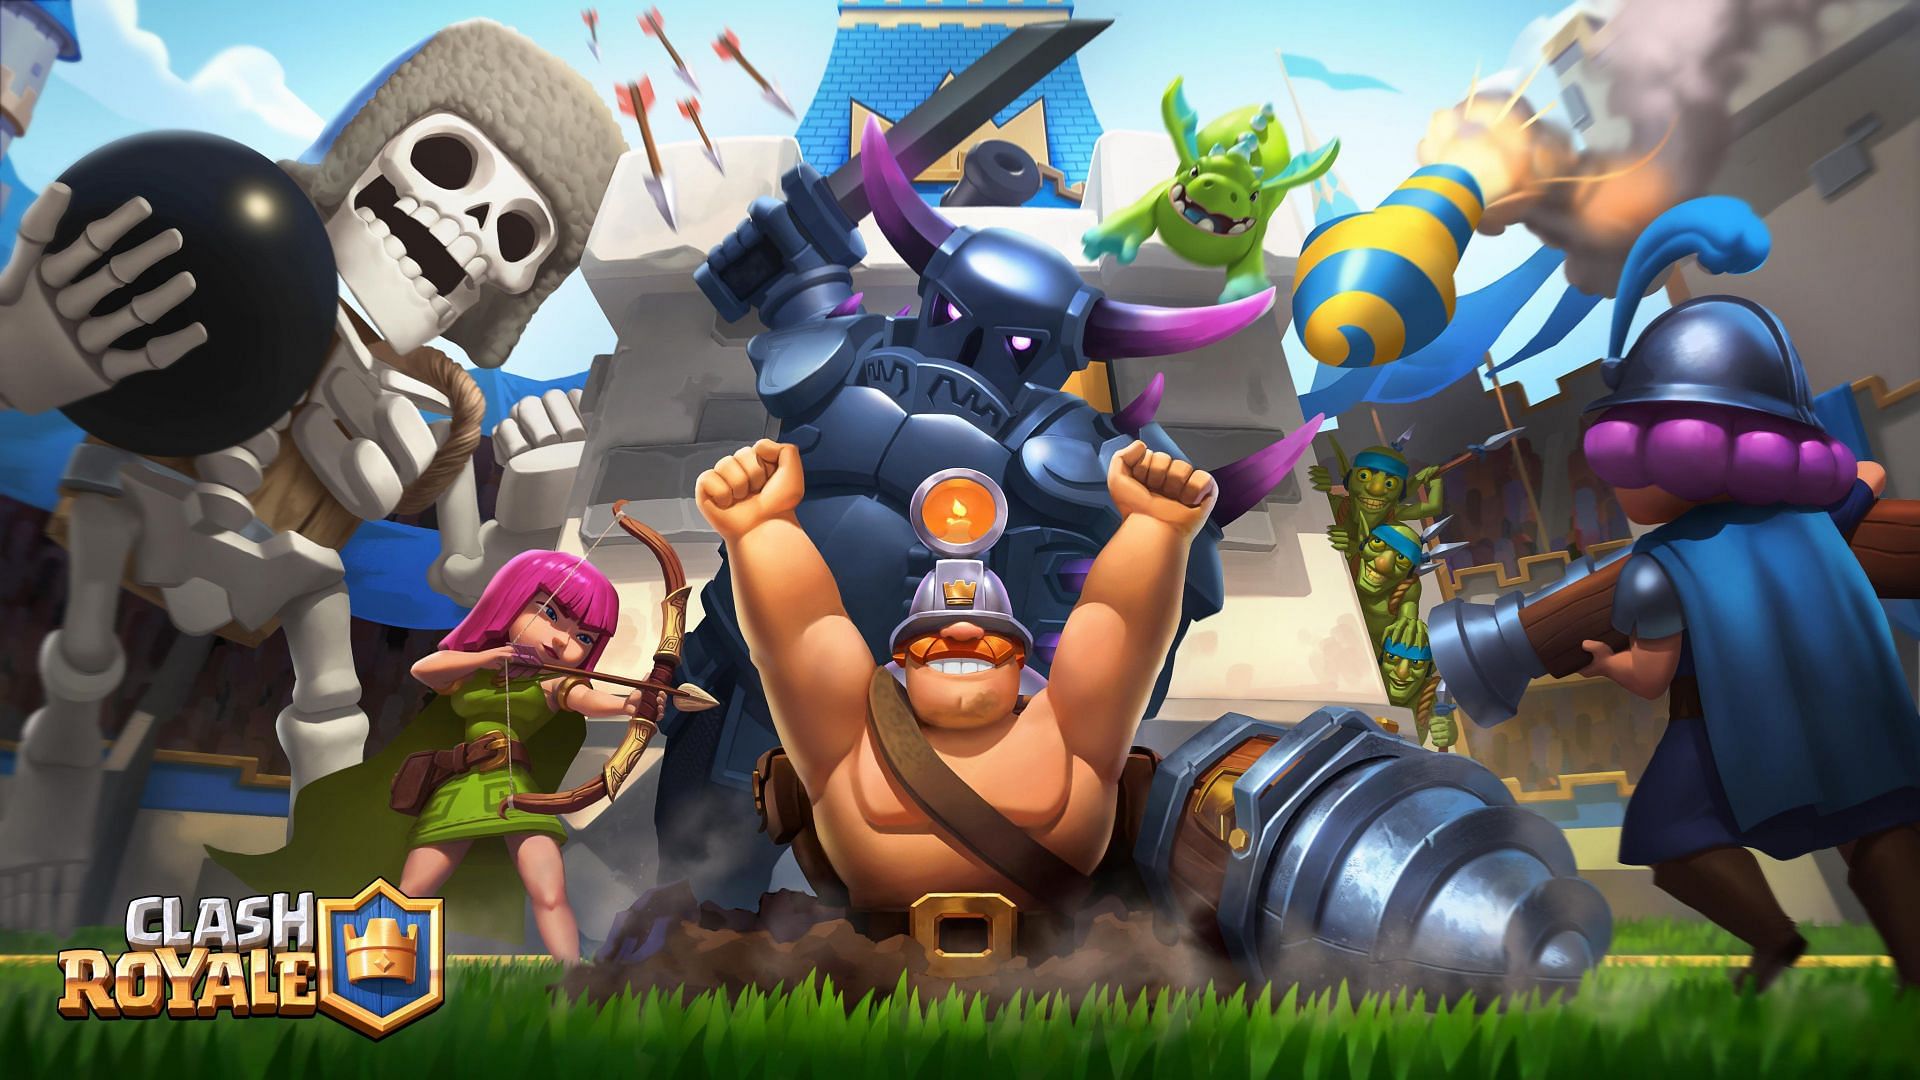 Consider these aspects while using Goblins in Clash Royale